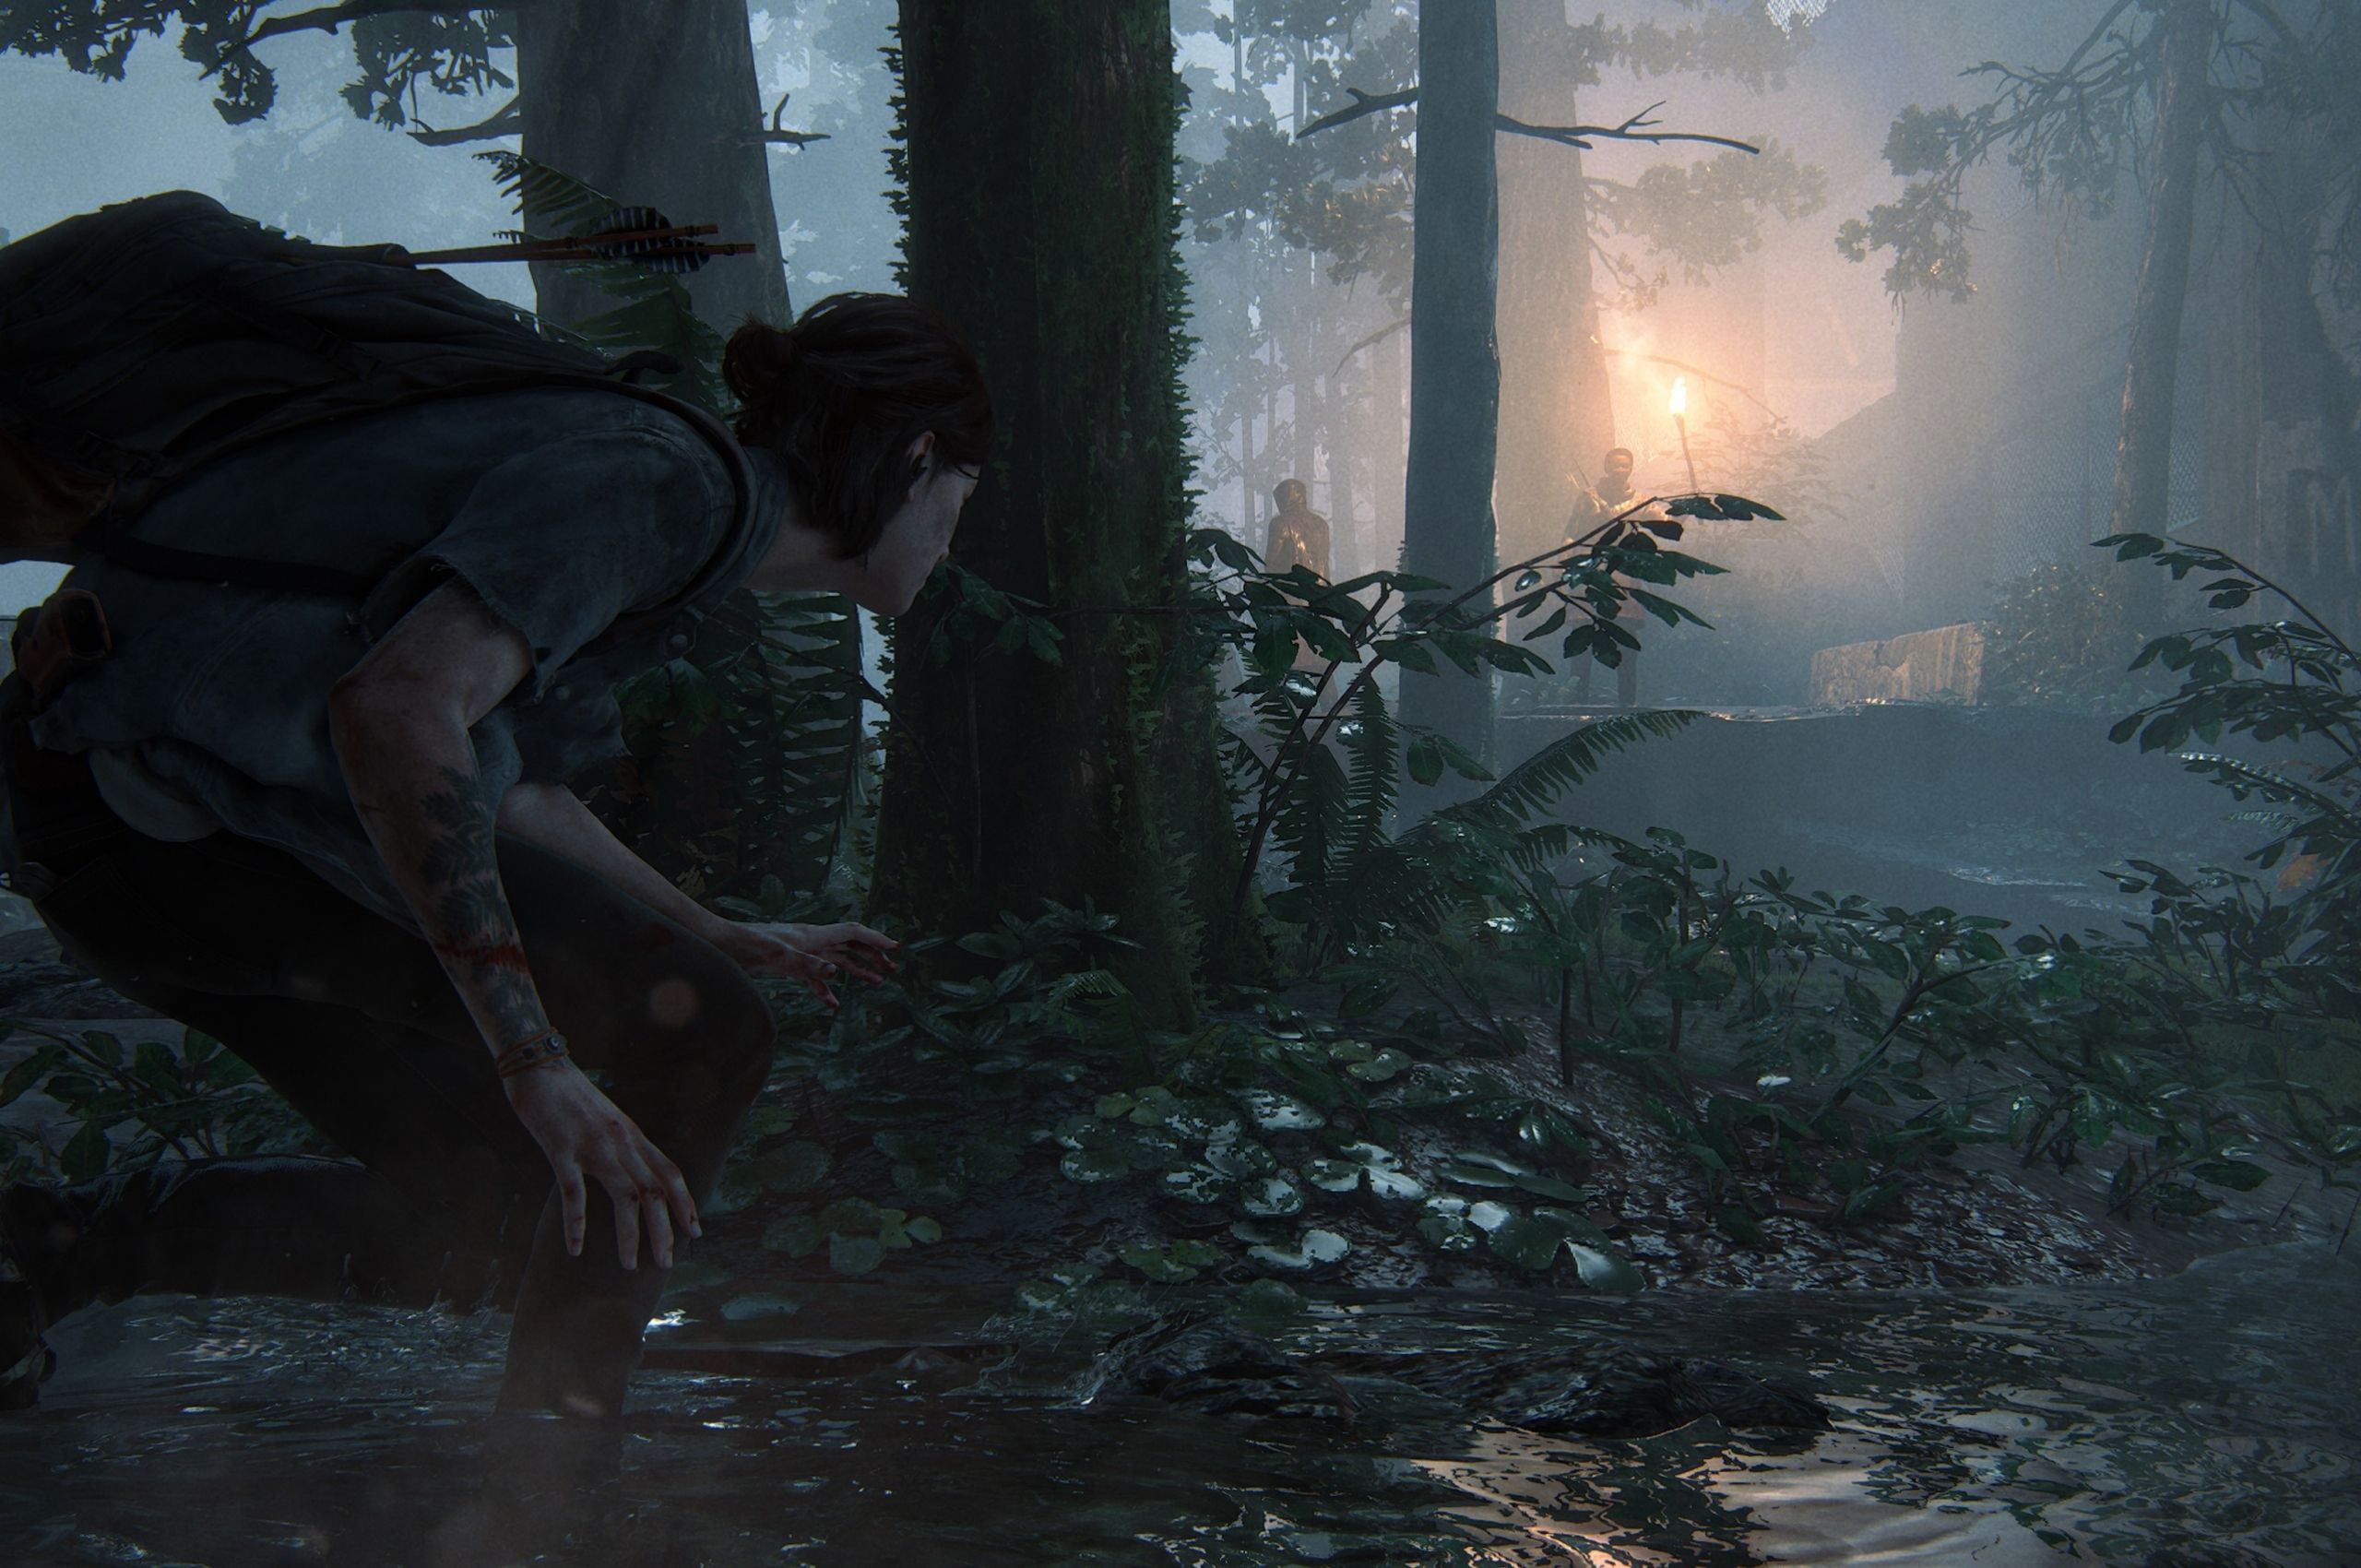 170+ The Last of Us HD Wallpapers and Backgrounds